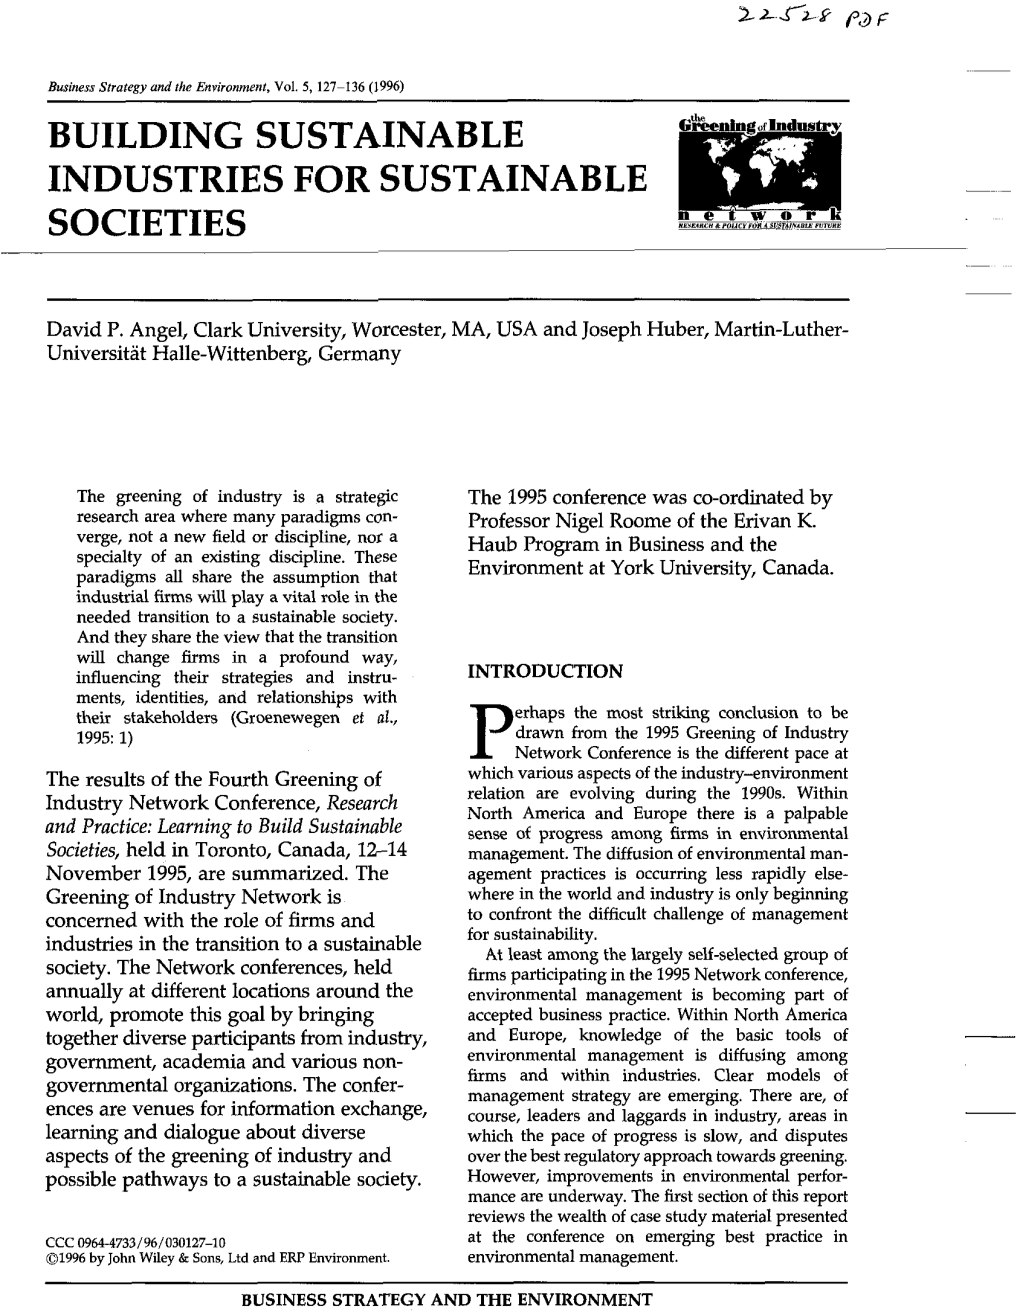 Building Sustainable Industries for Sustainable Societies